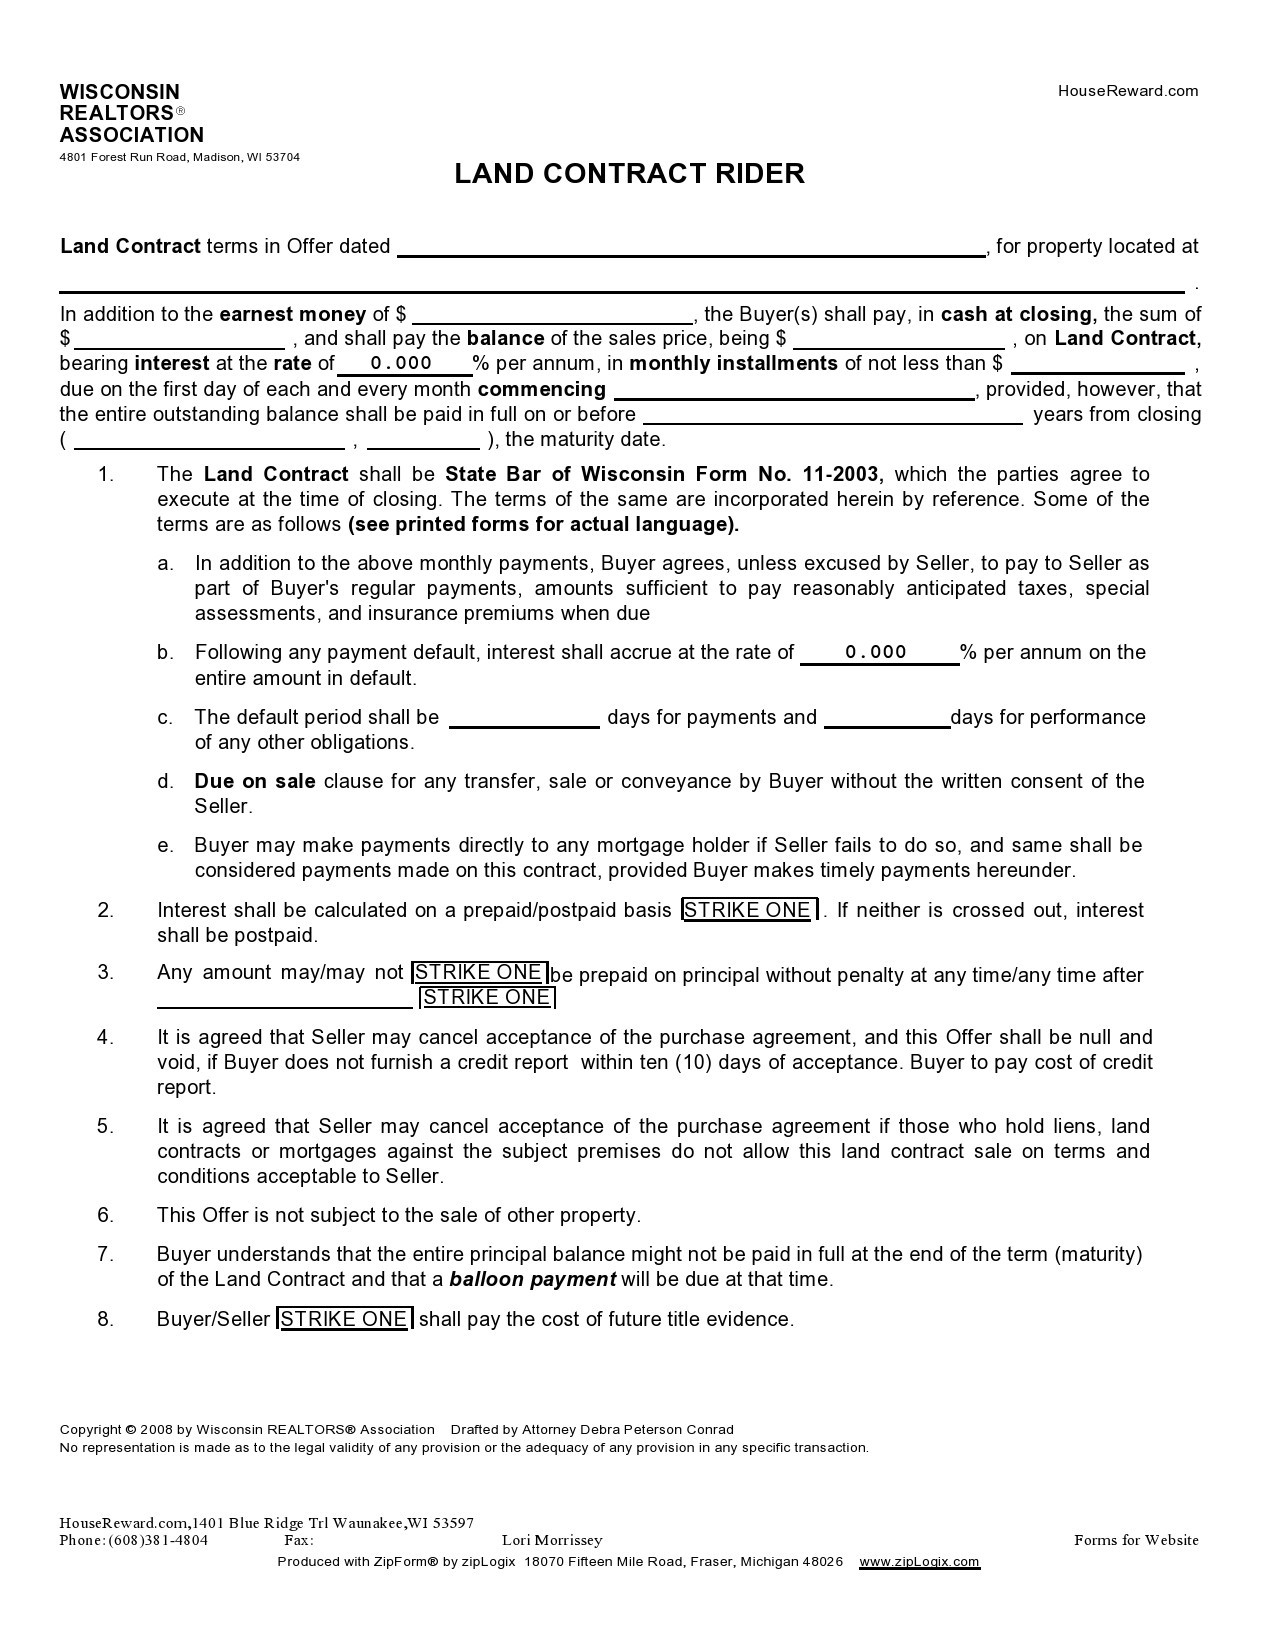 printable-blank-land-contract-form-easiest-contract-and-agreement-templates-for-leases-real